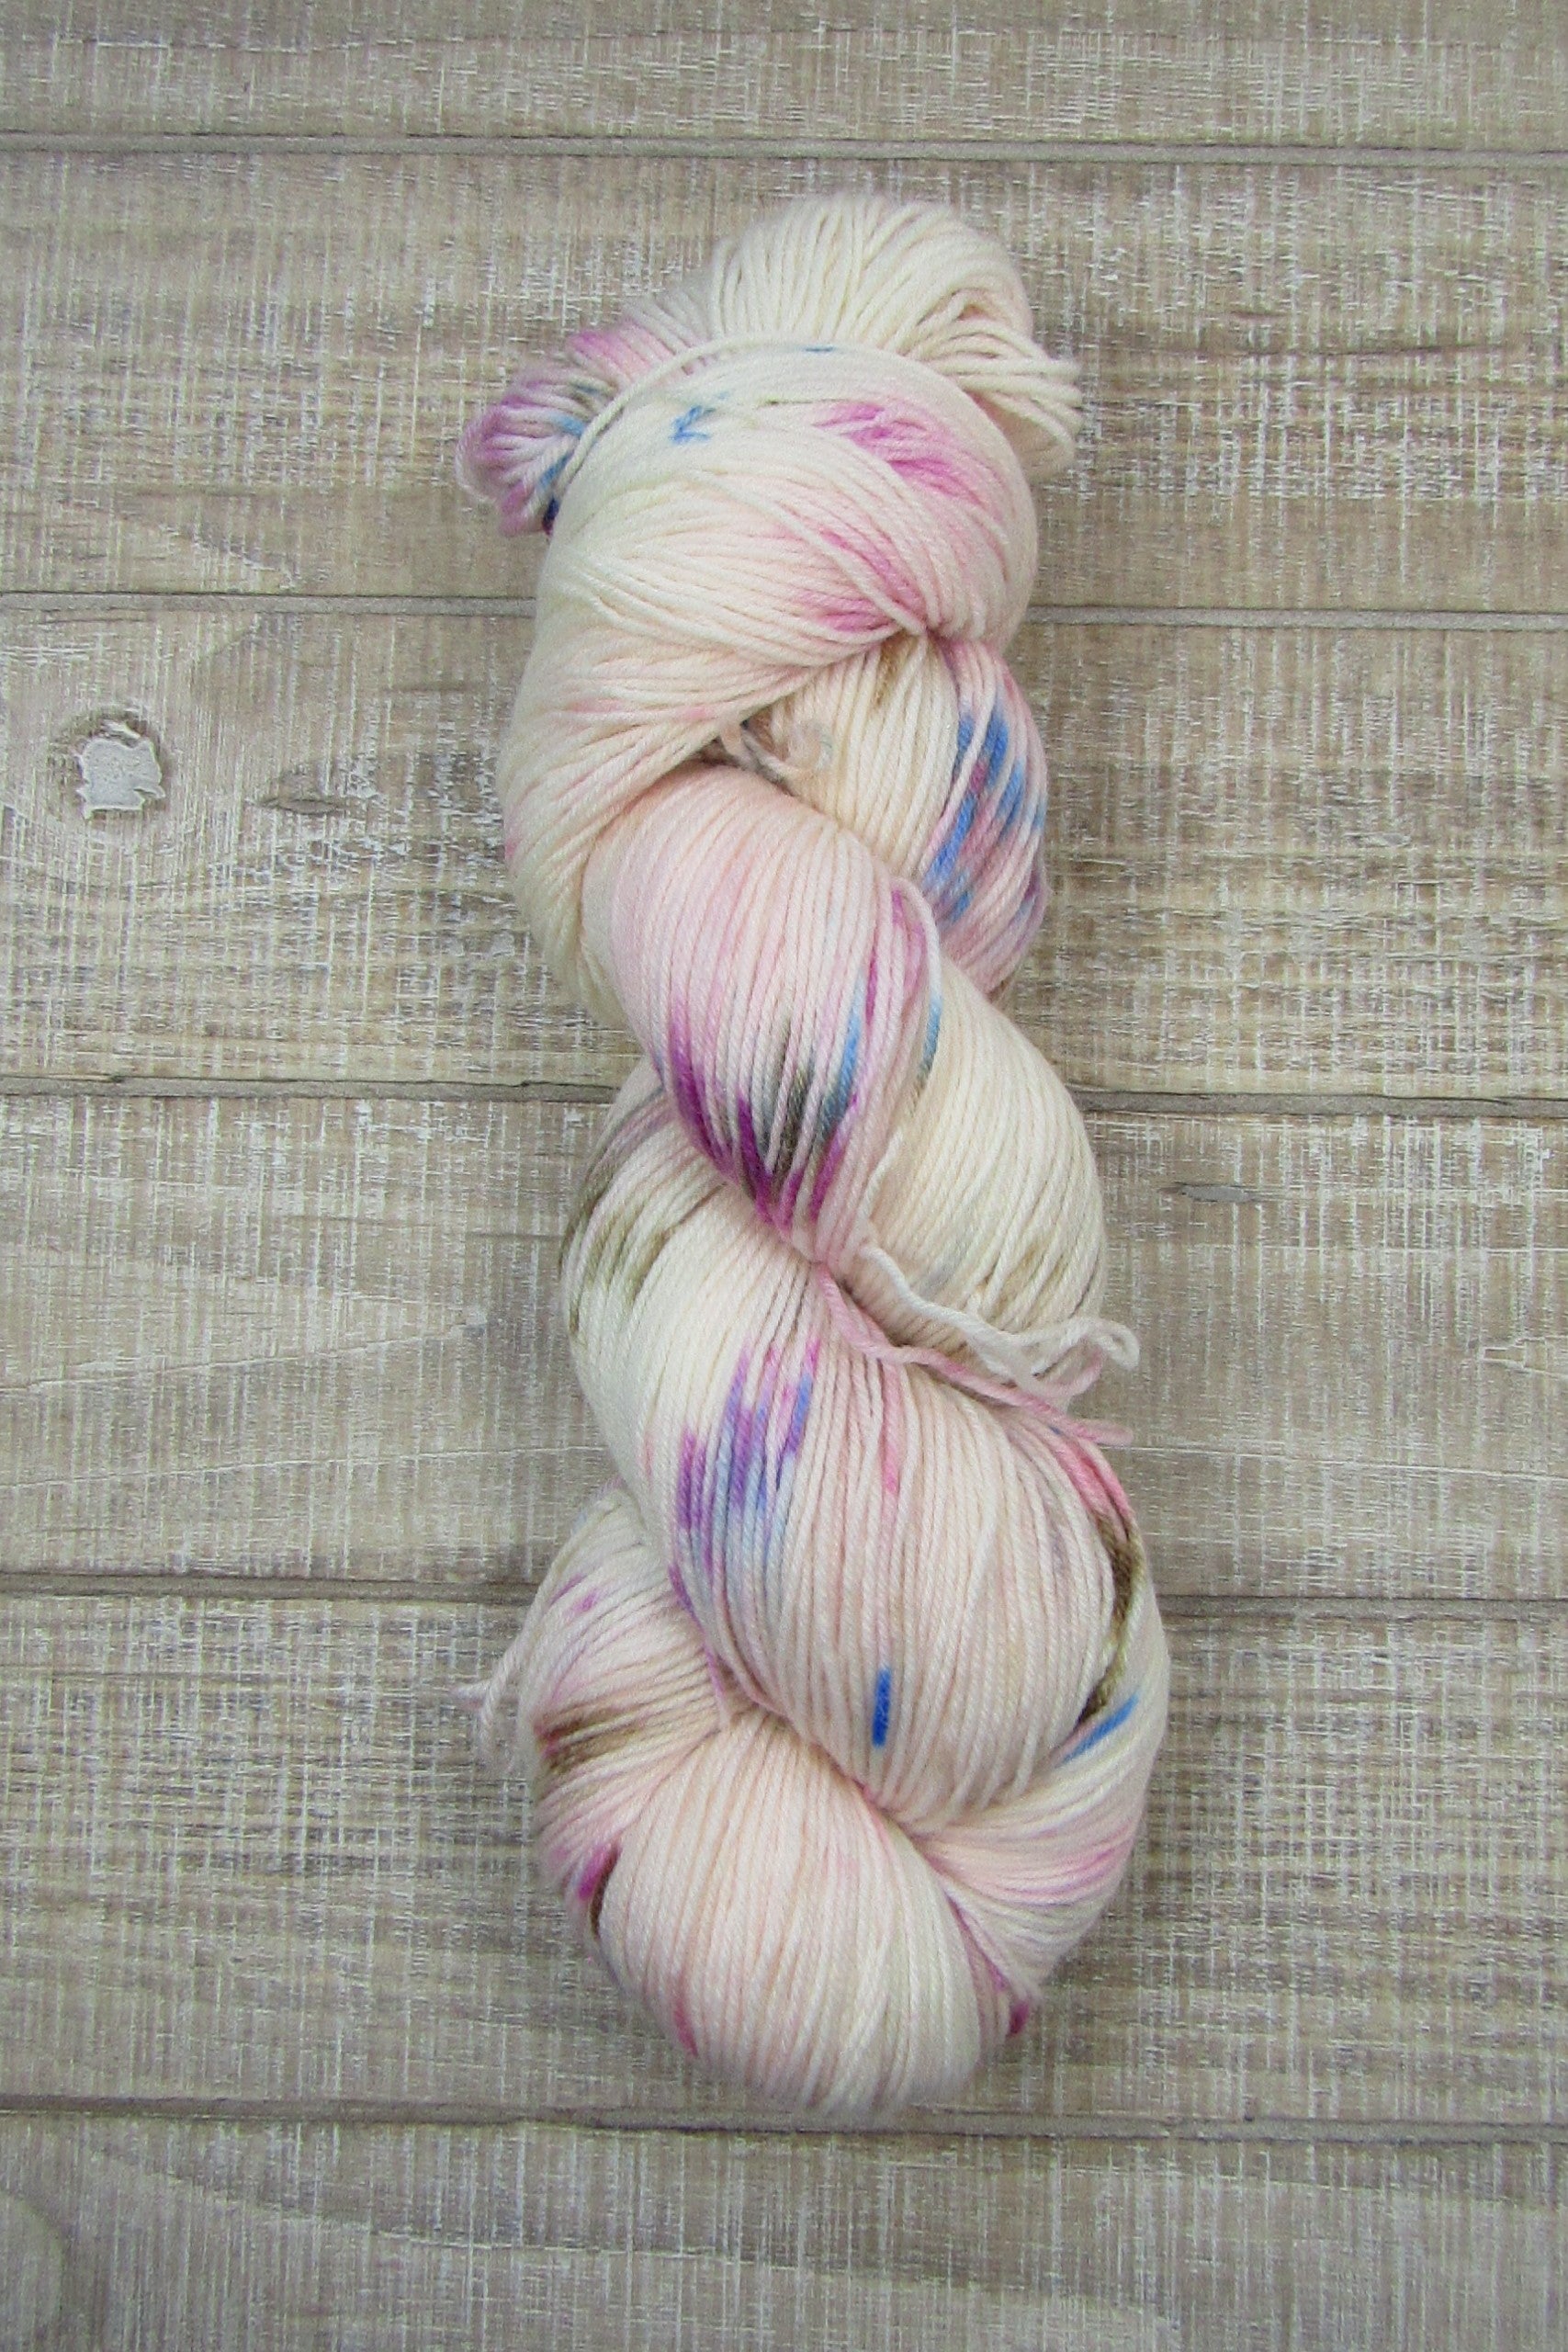 Hand-Dyed Yarn speckled with blue, chestnut, berry crush, and pink.